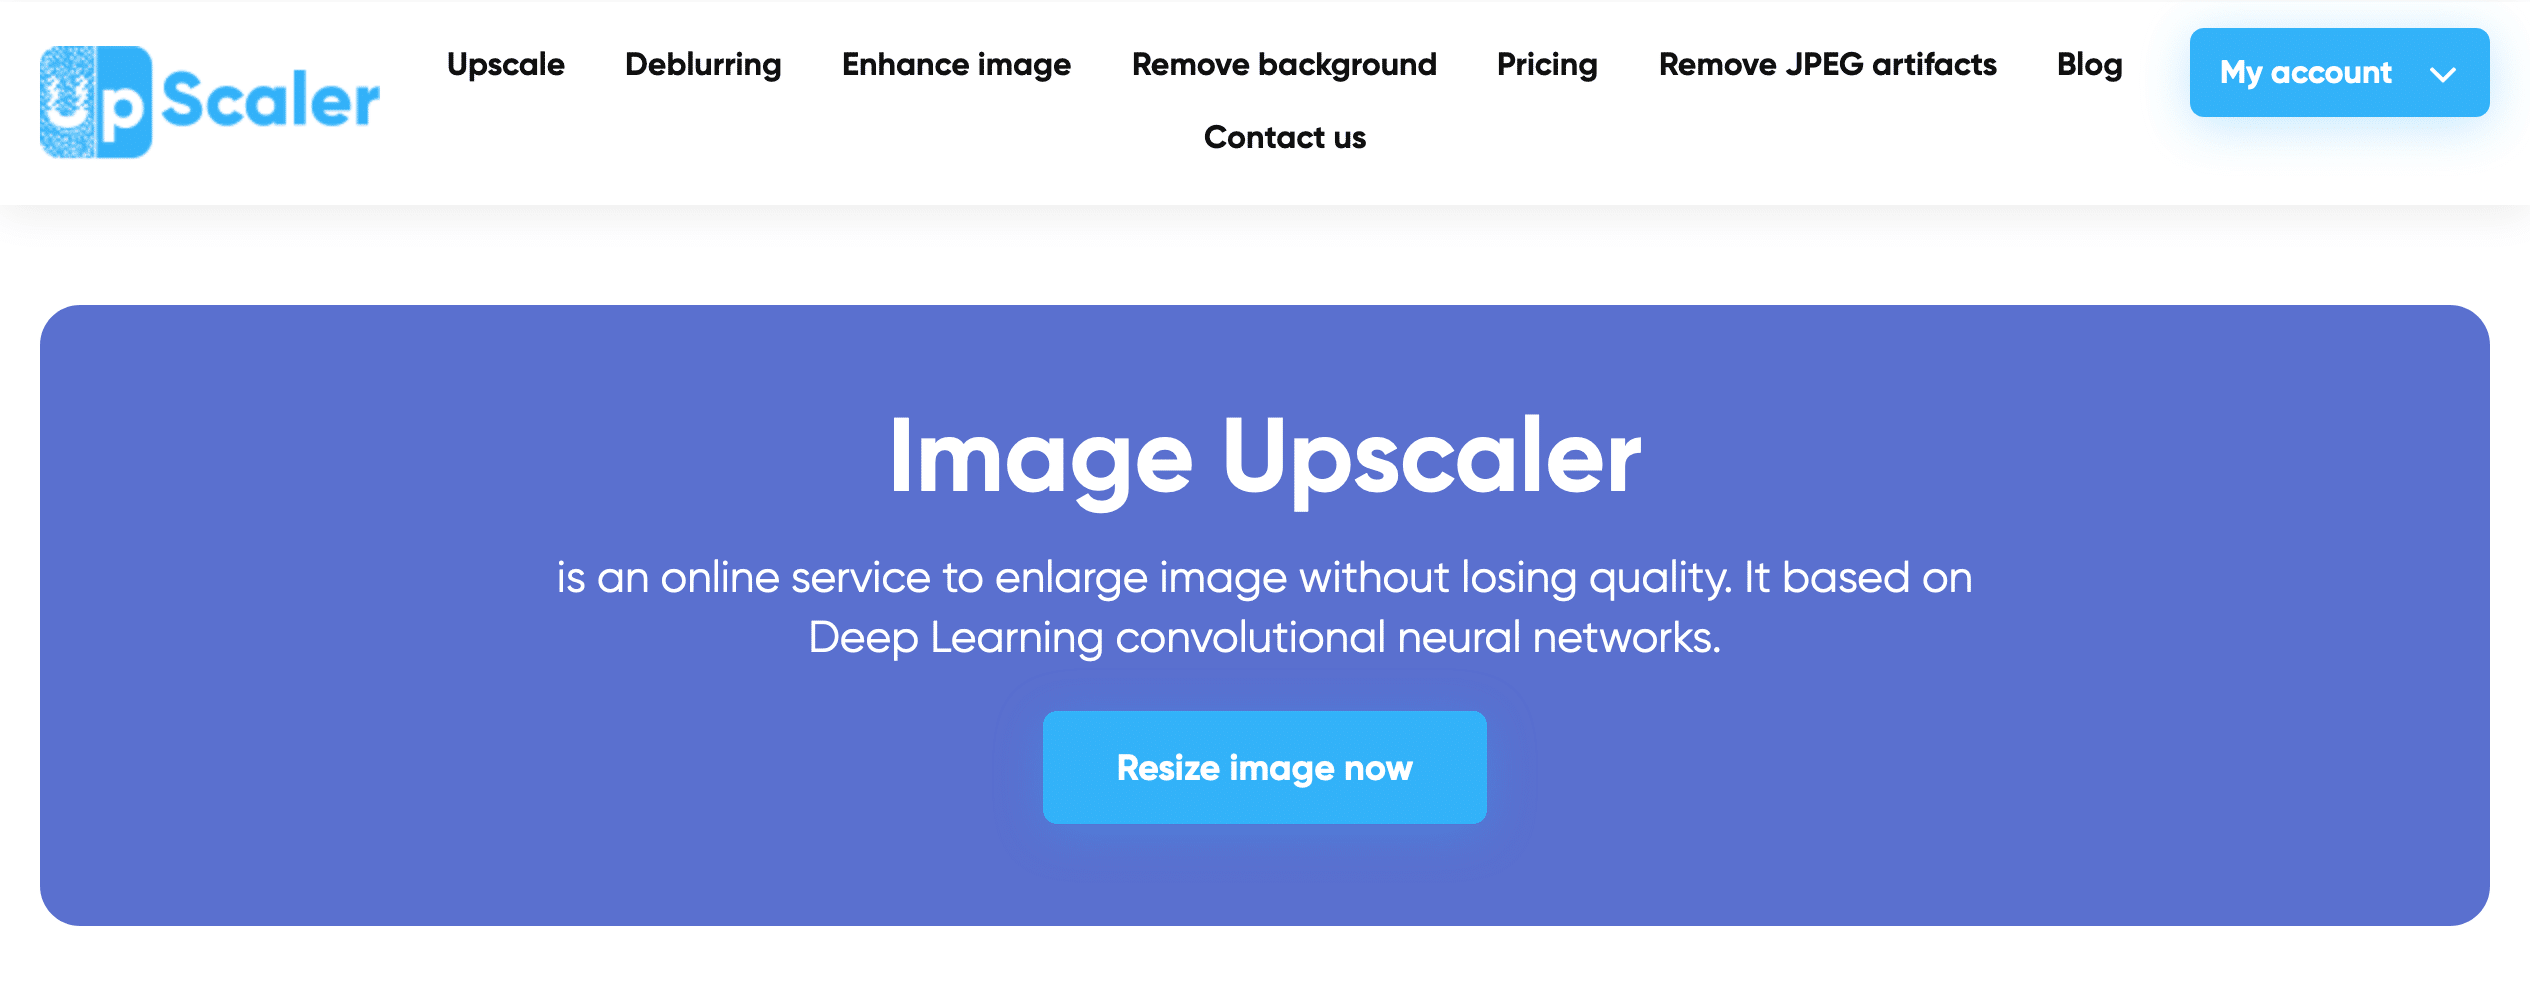 Ampliar y mejorar tus imagenes de forma online - Image Upscaler is an online service to enlarge image without losing quality. It based on Deep Learning convolutional neural networks.